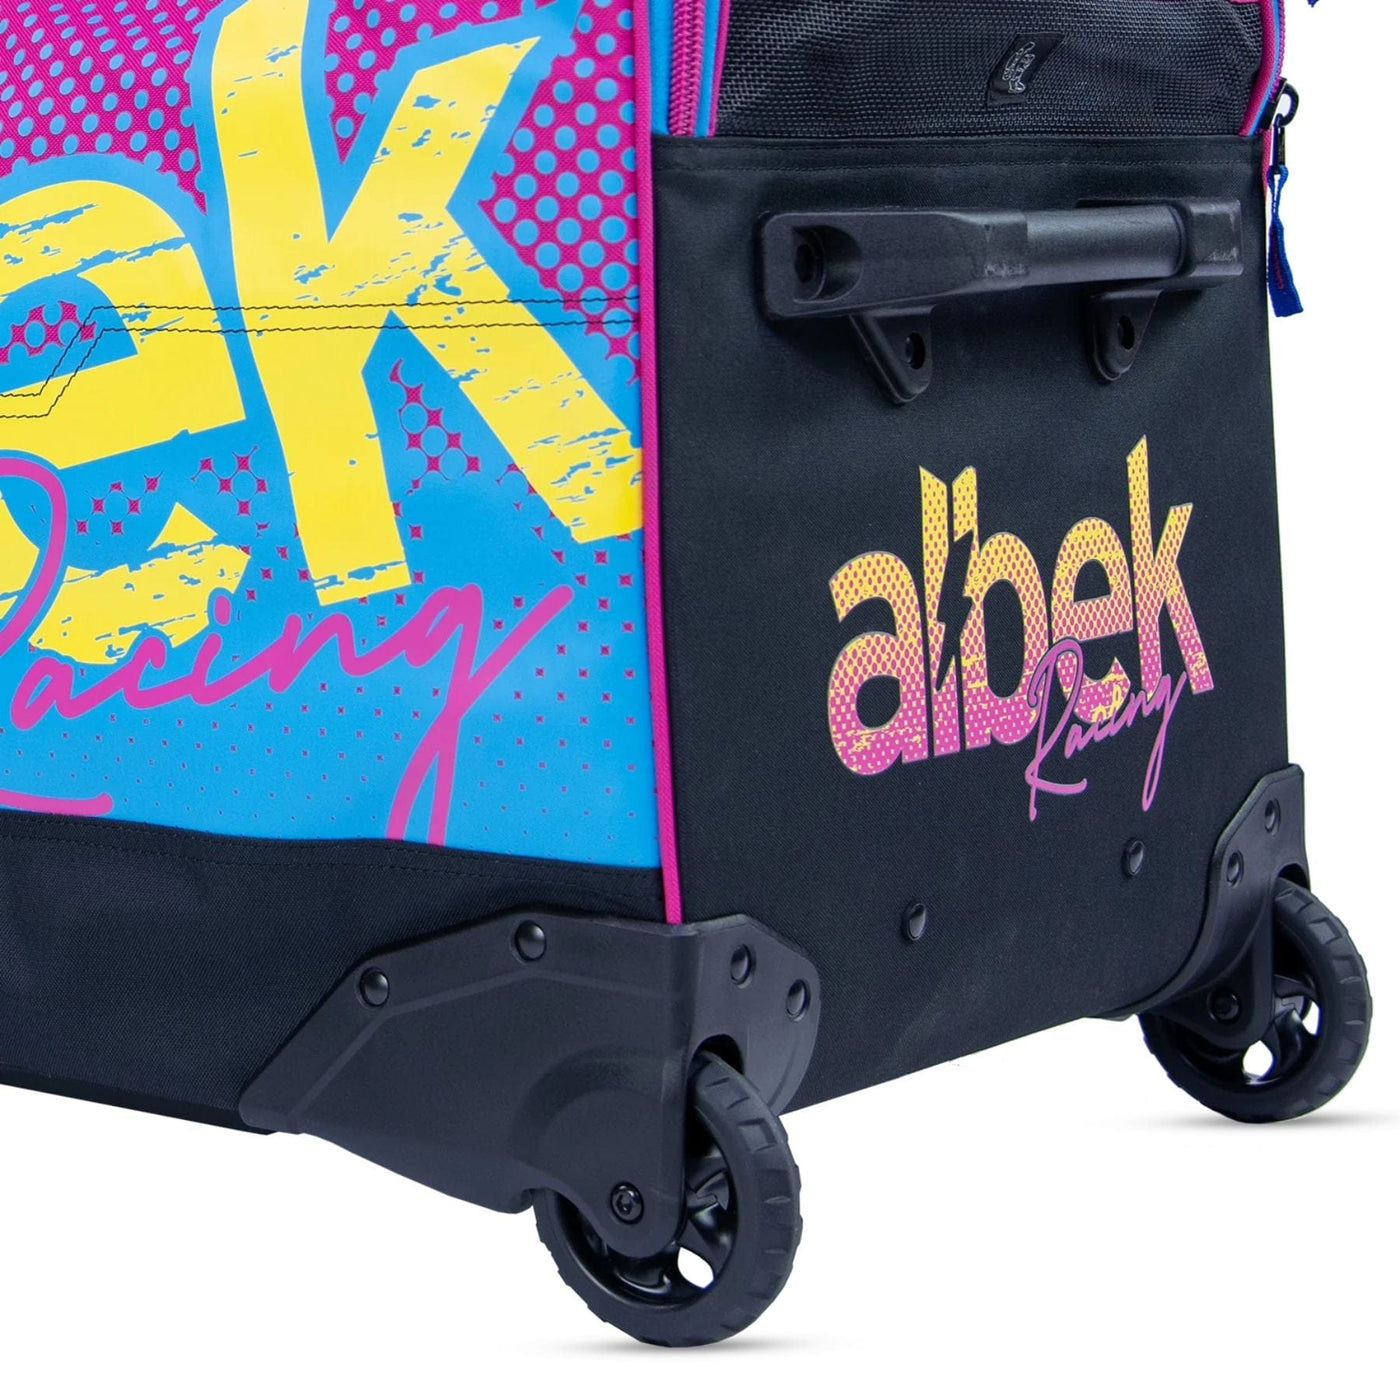 Albek Wheeled Gear Bag Meridian Limited Edition - 90's Throwback